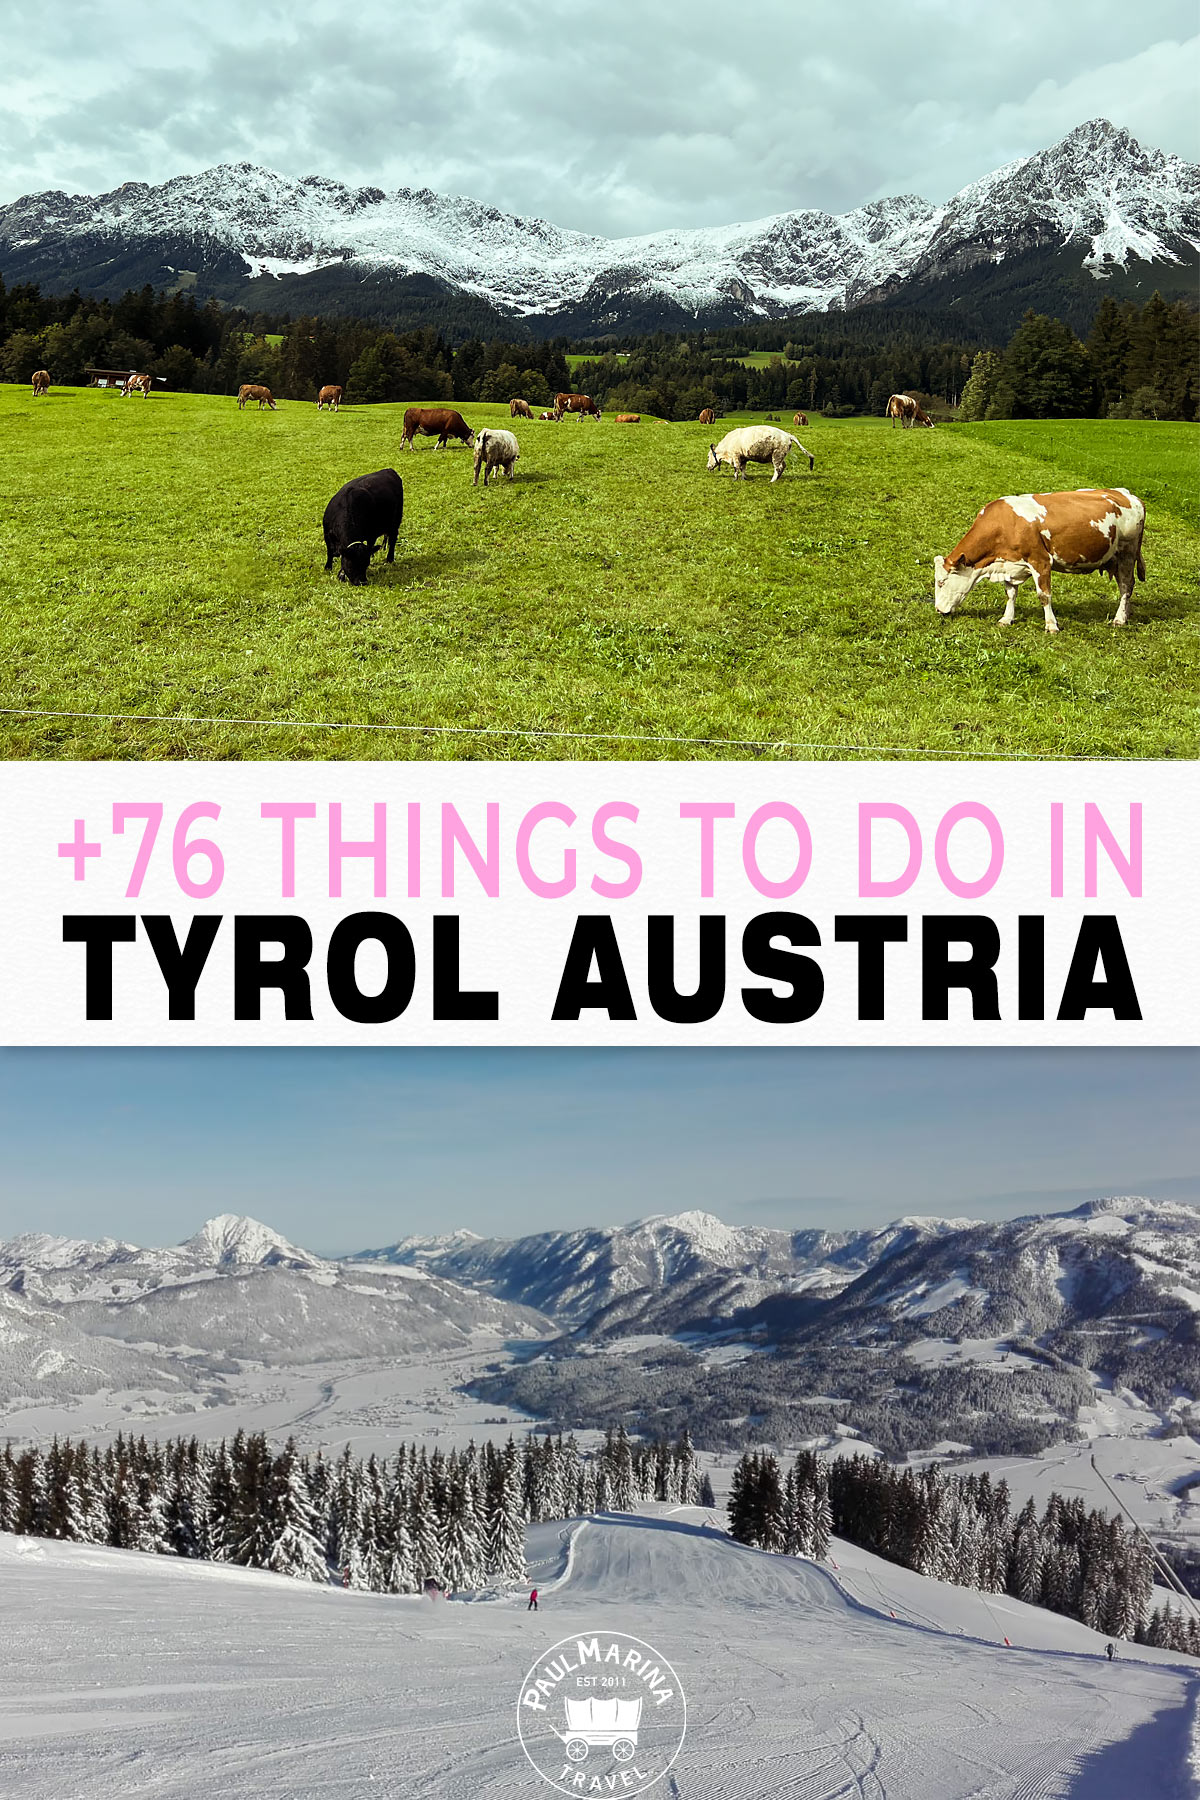 +76 Things to do in Tyrol Austria pin image